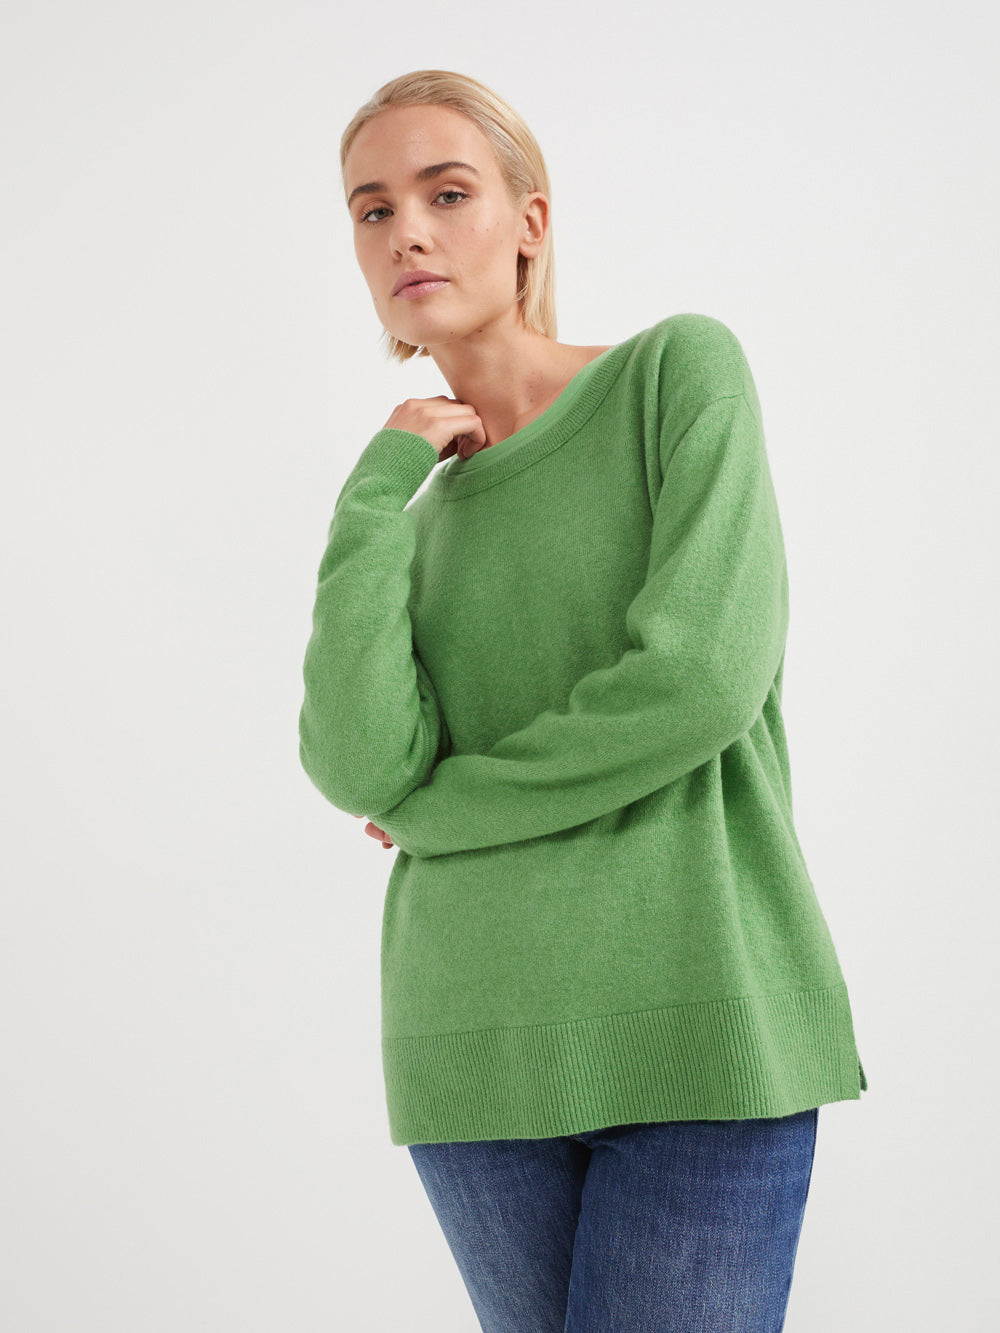 The Relaxed Open Neck Pullover | Commonry